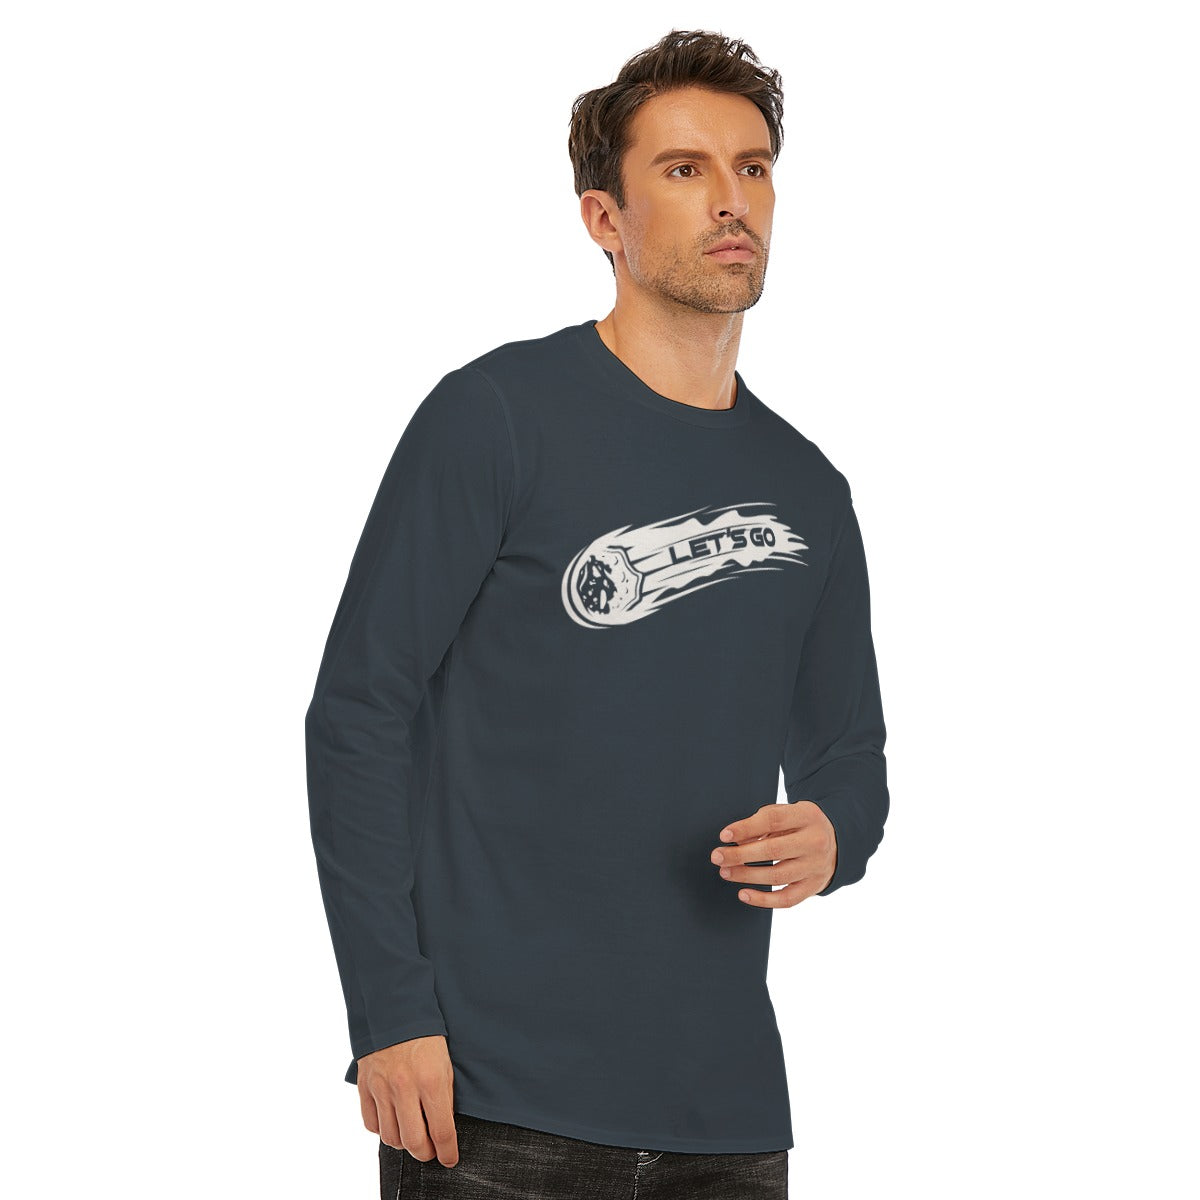 Adult Tbodin Gaming Long Sleeve T-Shirt